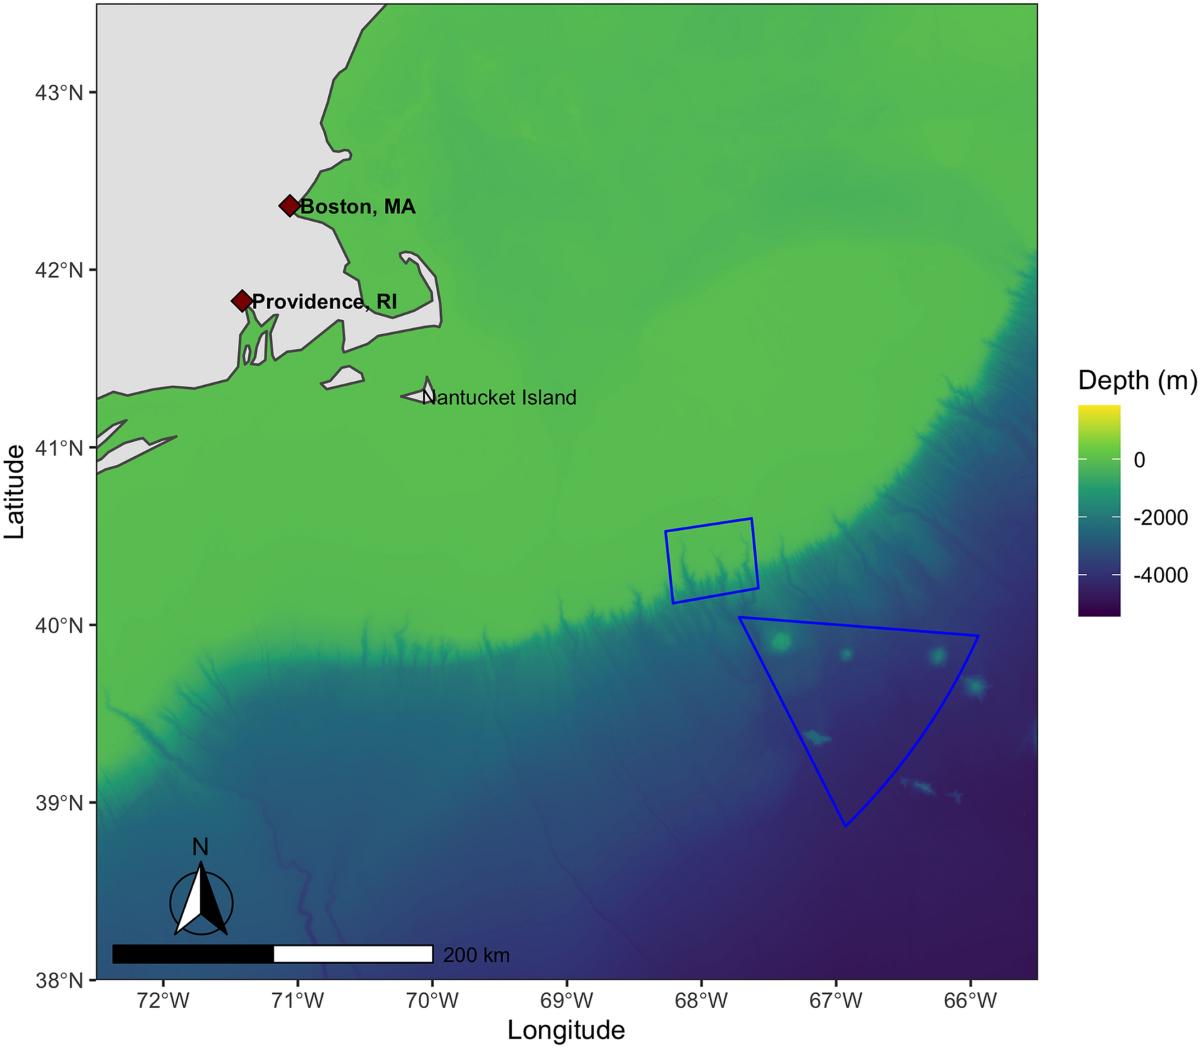 Fishing activity before closure, during closure, and after reopening of the  Northeast Canyons and Seamounts Marine National Monument